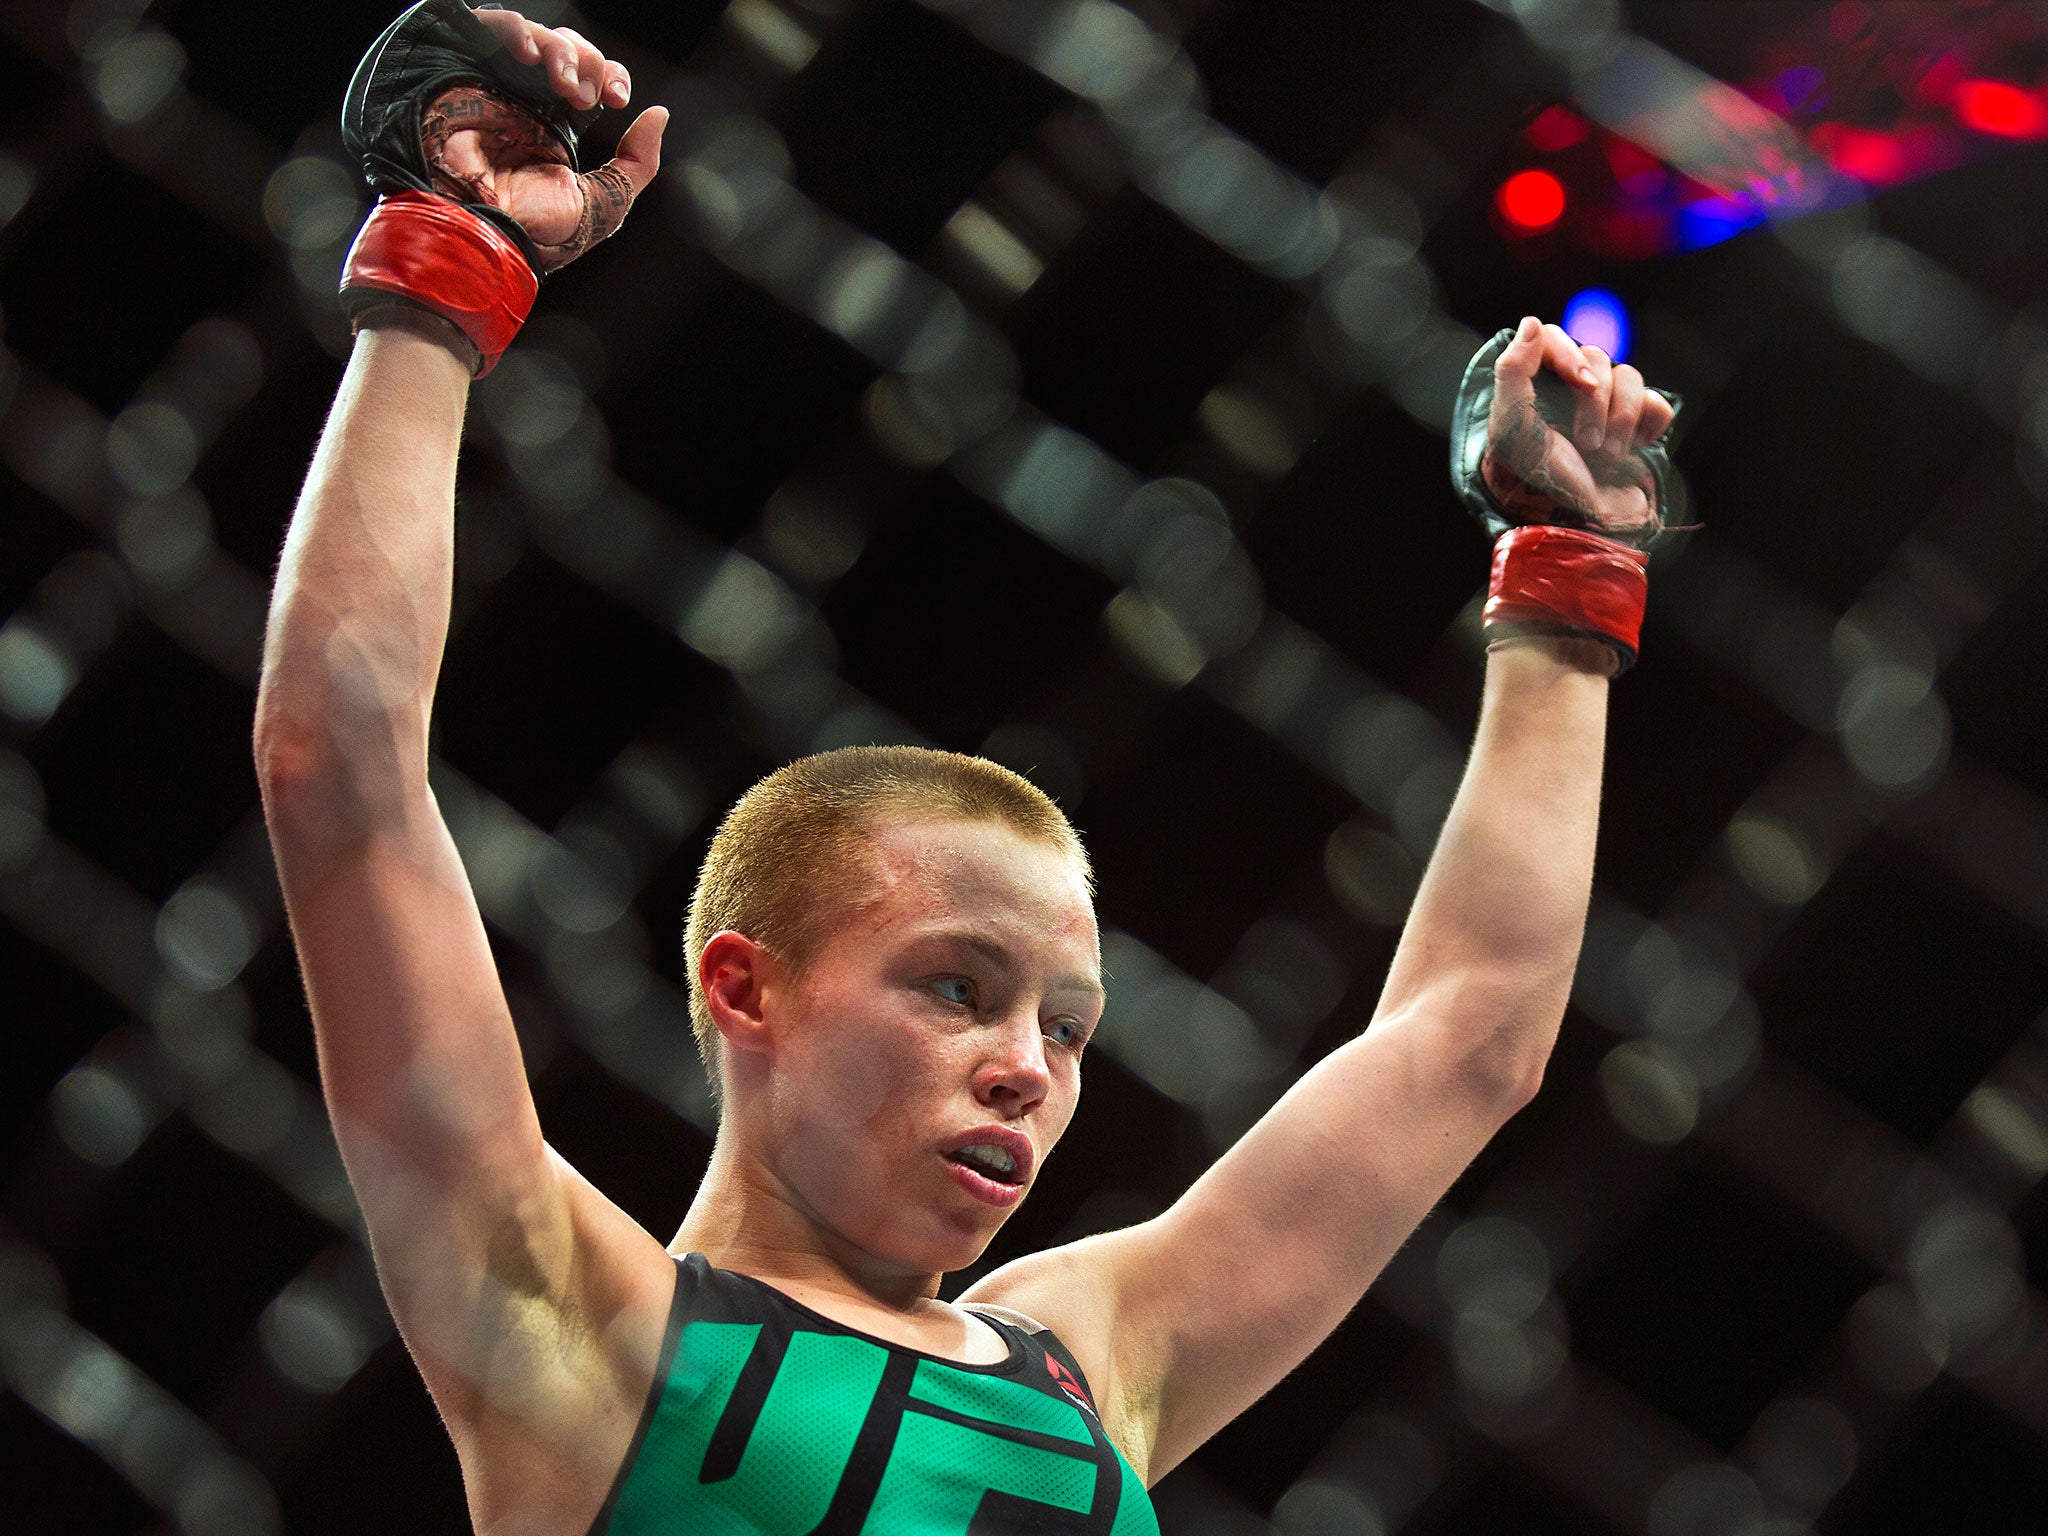 Rose Namajunas raises her arms in victory over Paige VanZant